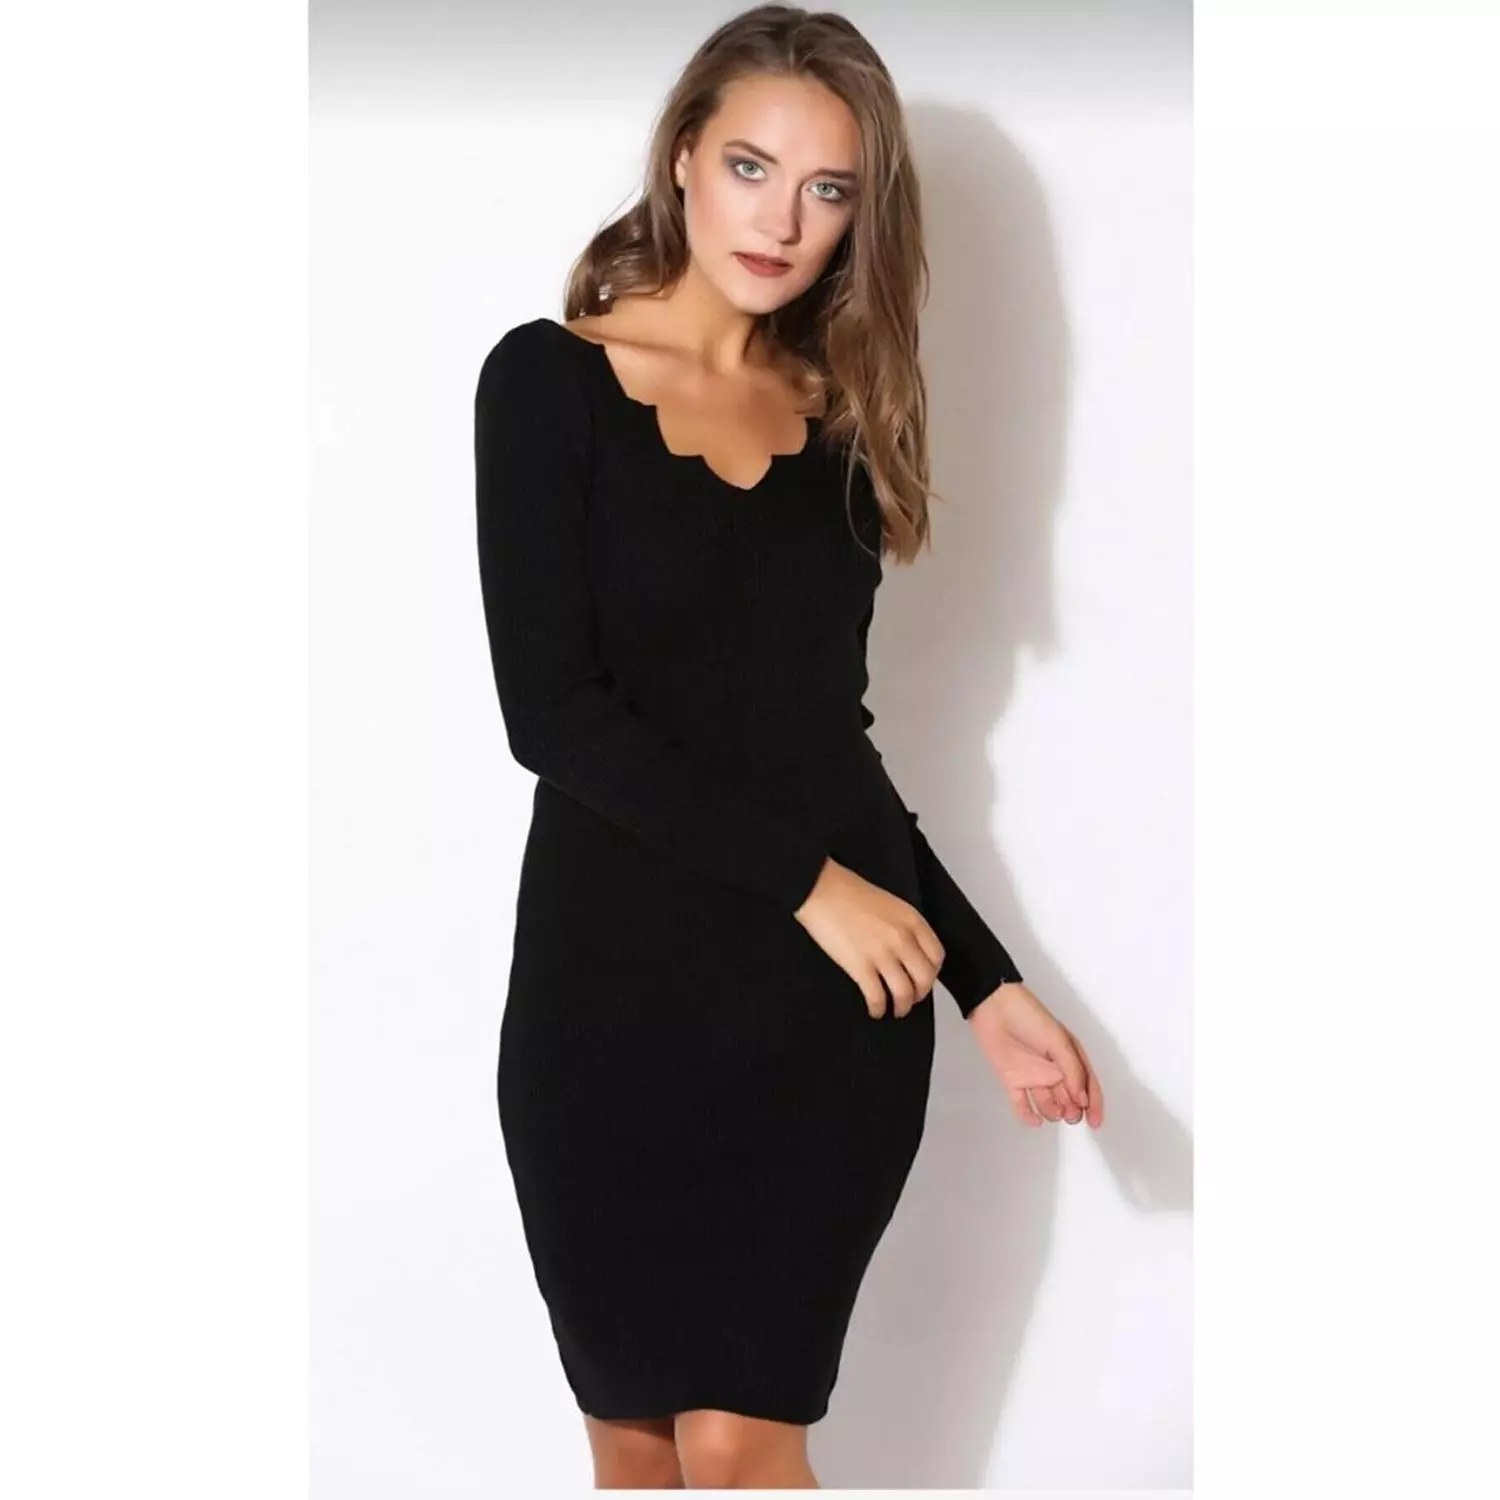 Women's Black Collar Detailed Knitwear Dress hover image